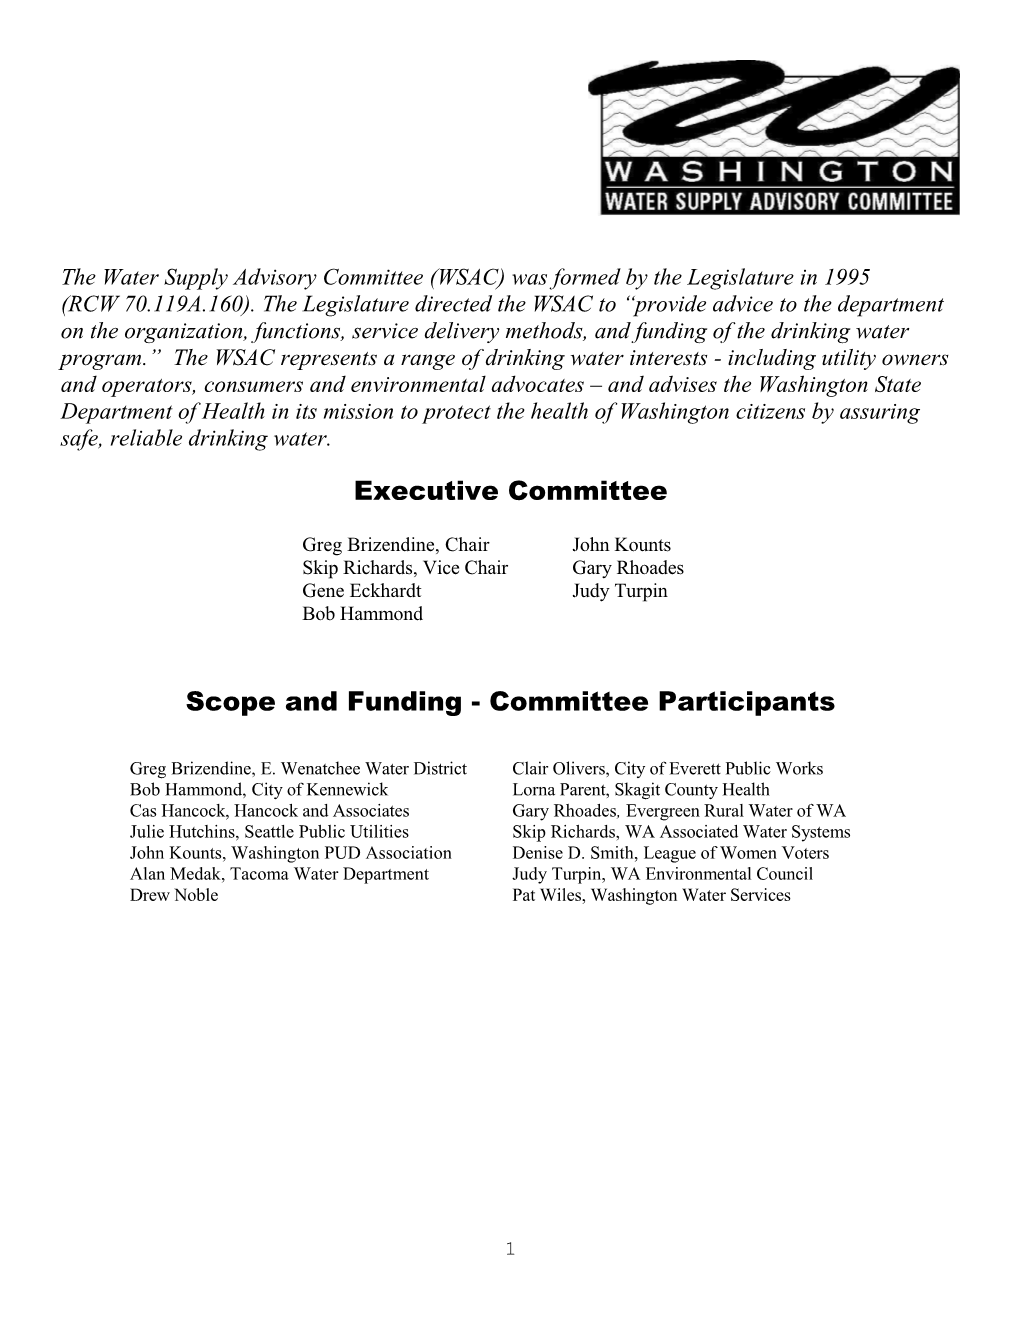 The Water Supply Advisory Committee (WSAC) Was Formed by the Legislature in 1995